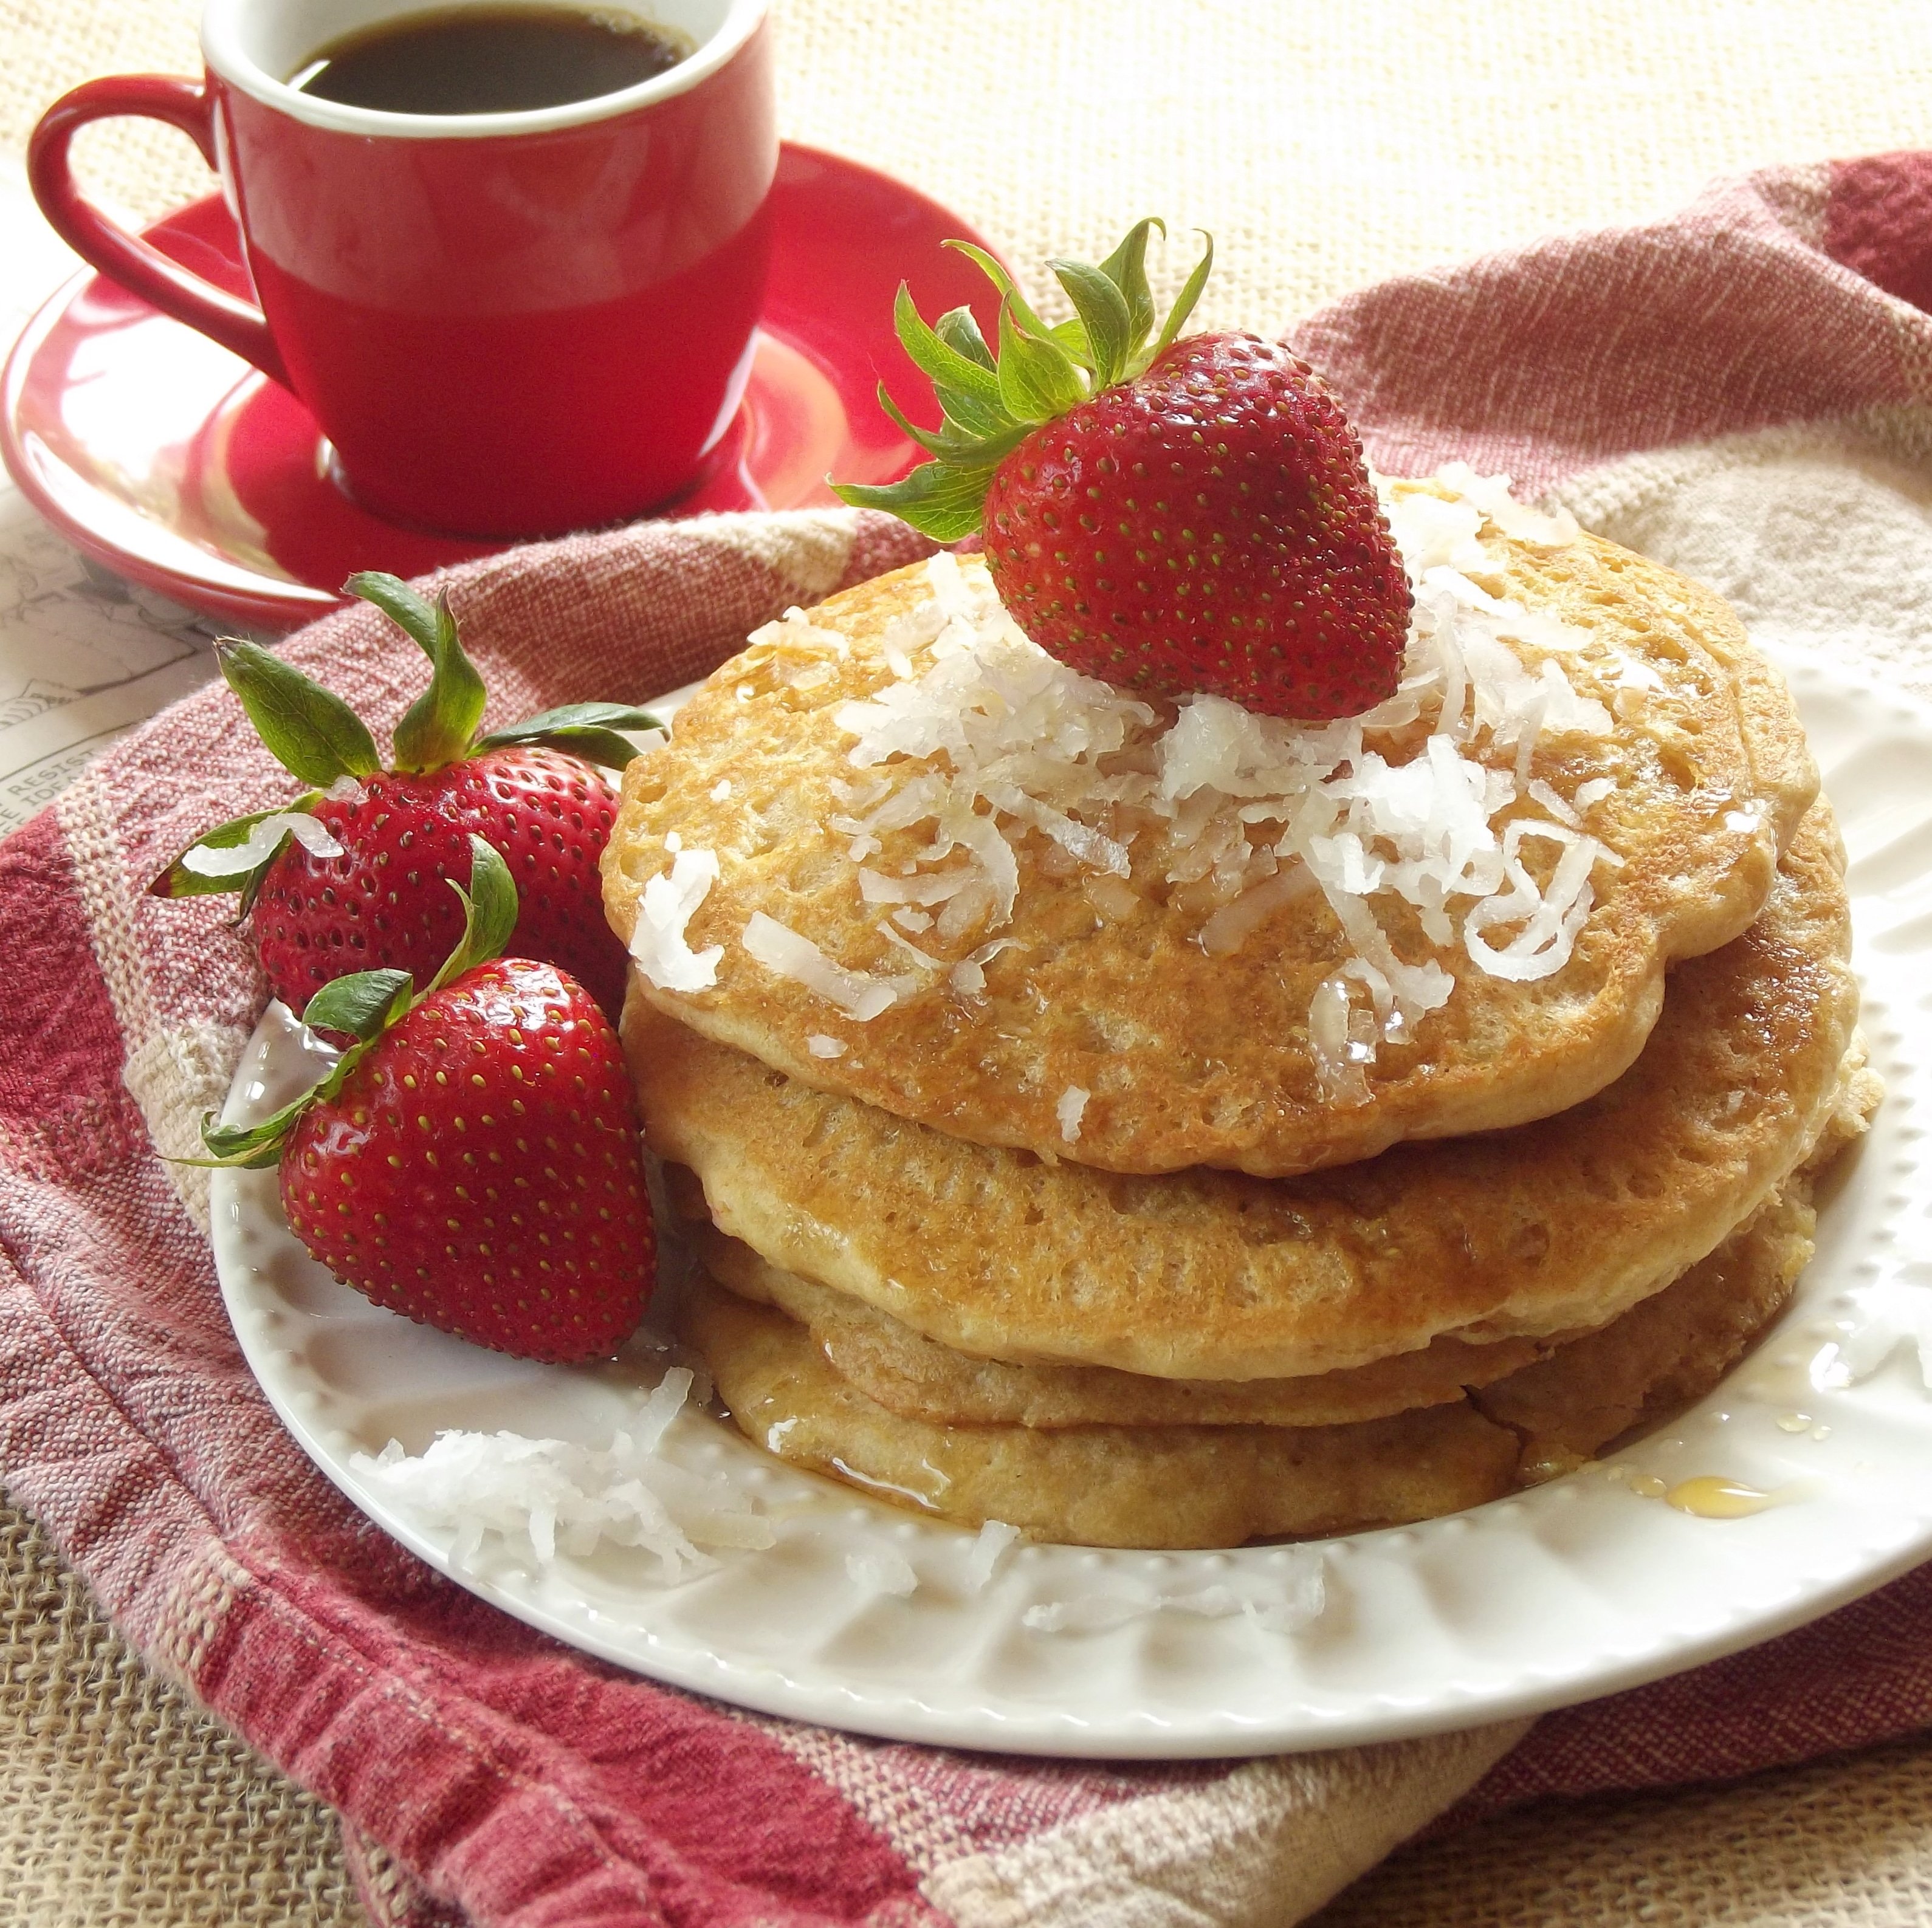 Stack of Quinoa Pancakes and Strawberries on a Plate with Coffee Cup in the Background